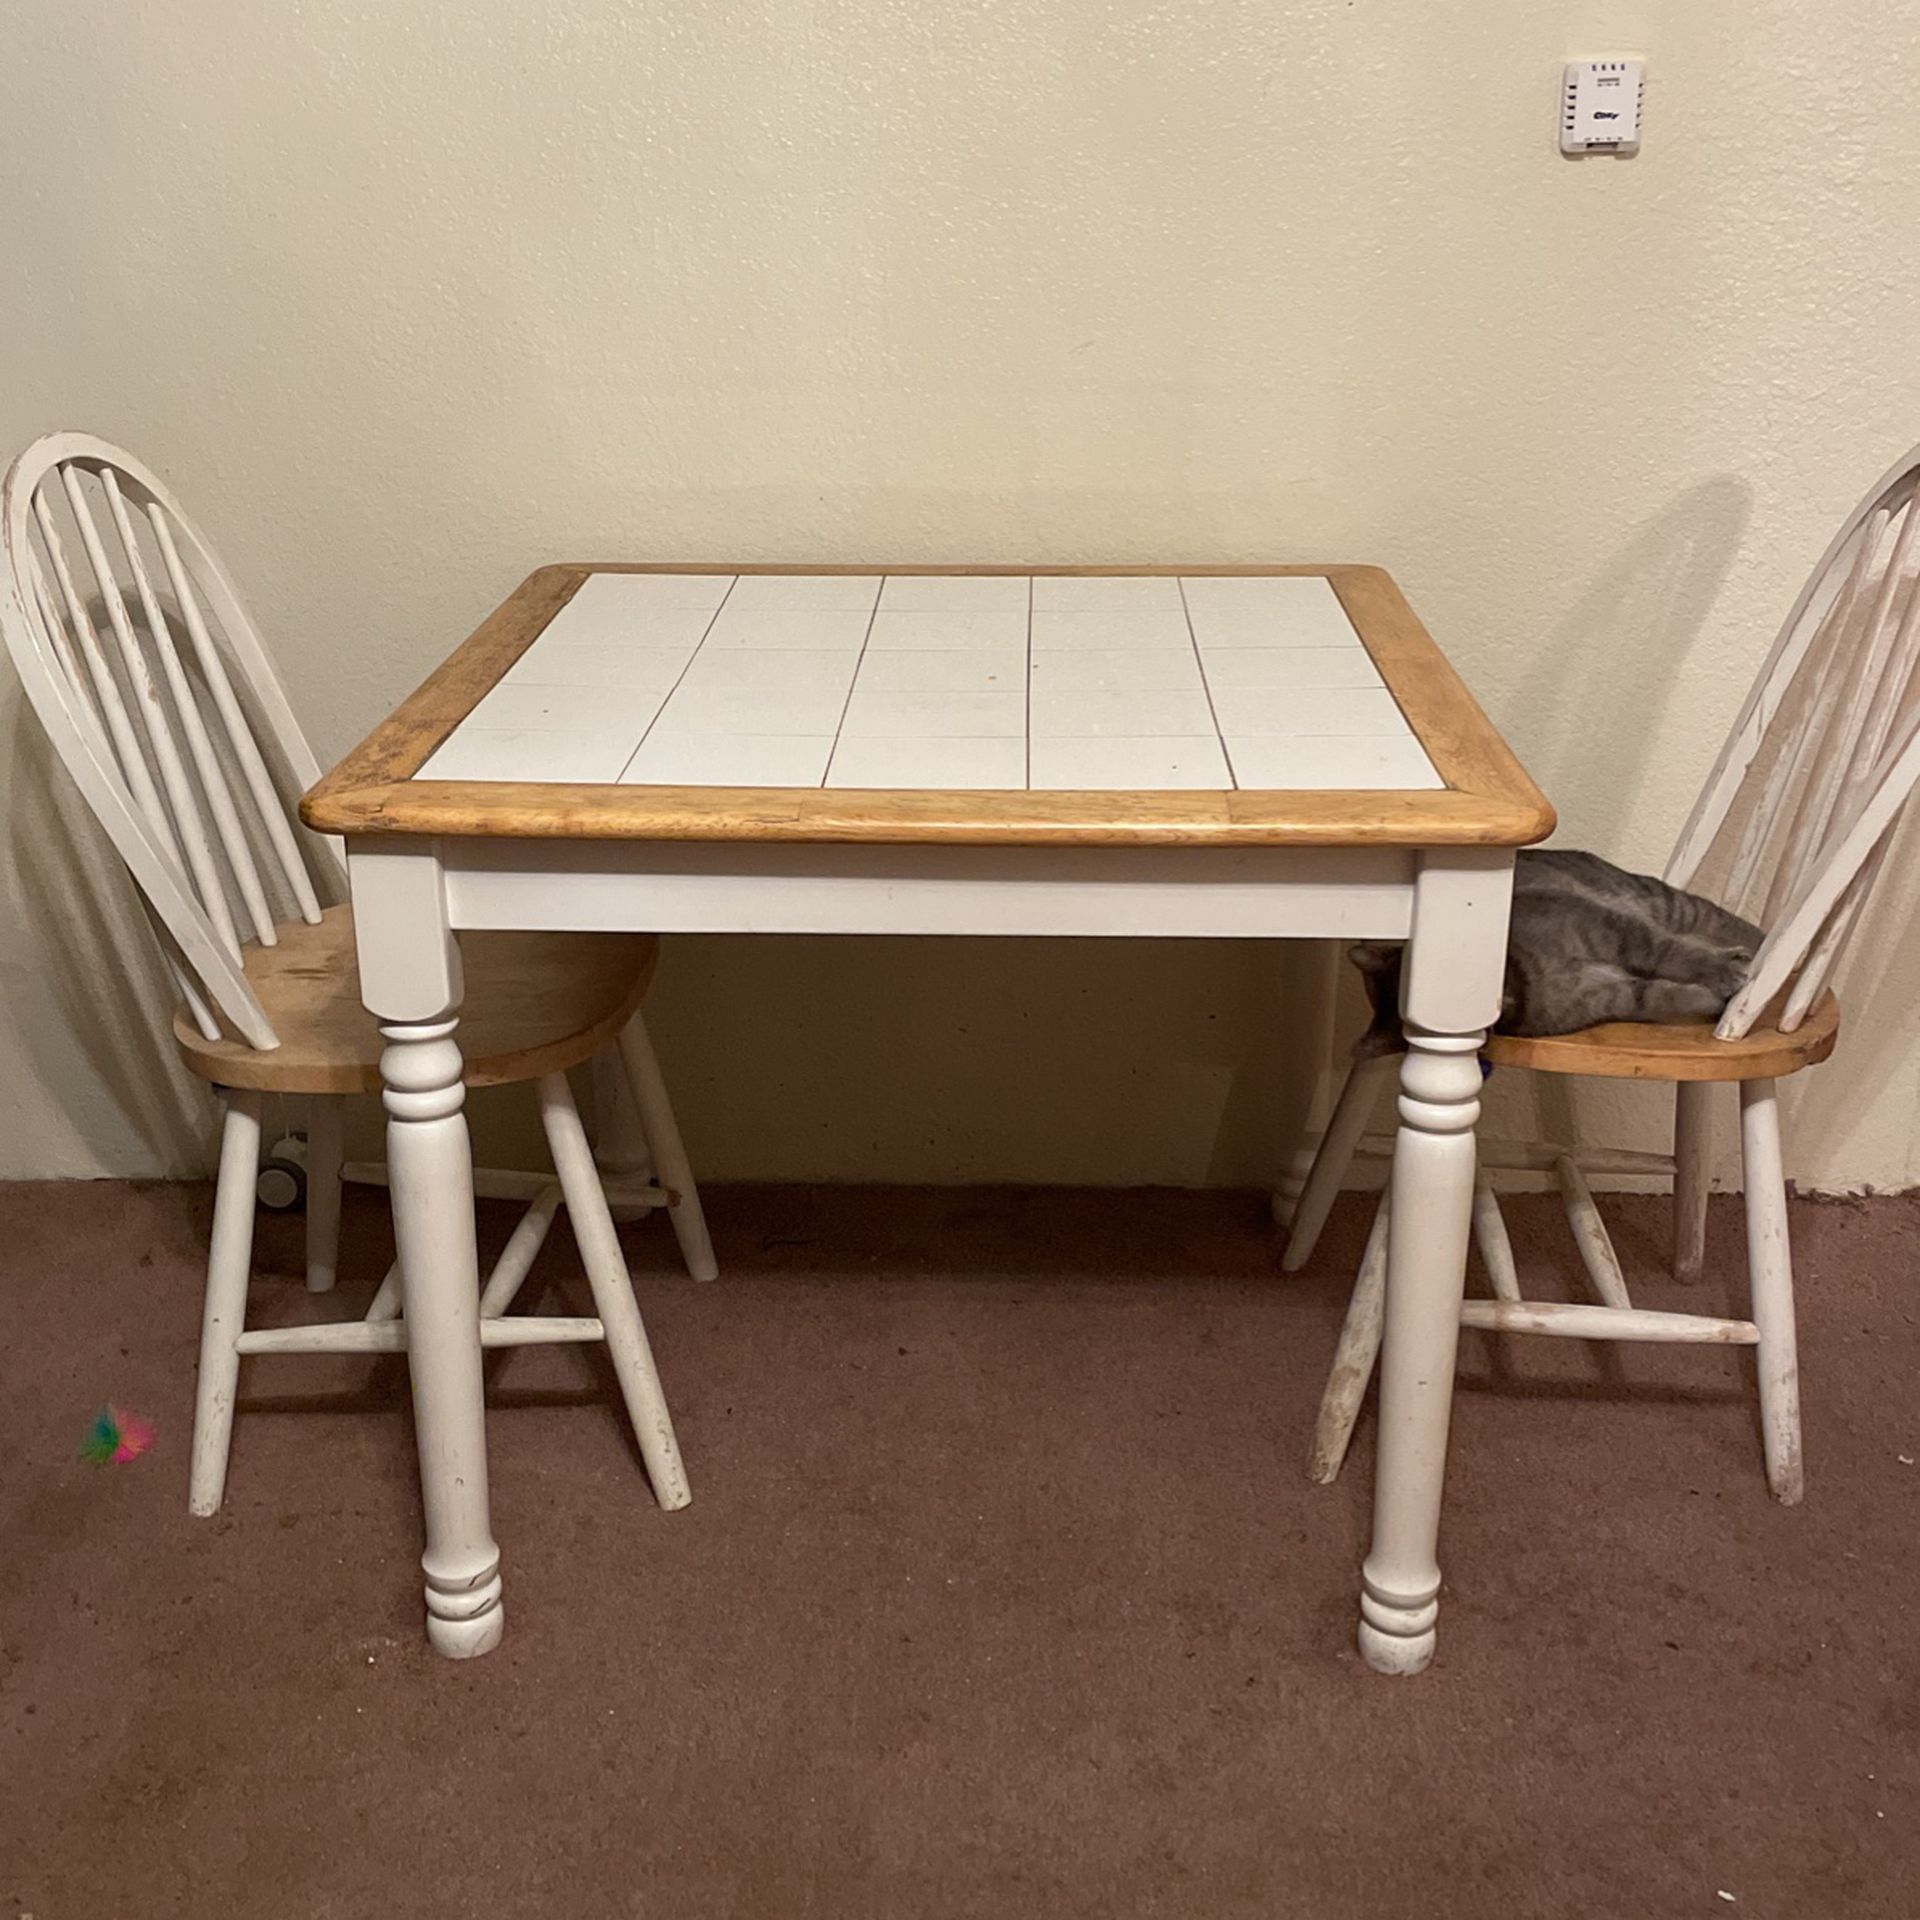 Small Wooden Dining Table And Two Chairs White & Tan Dinner Table